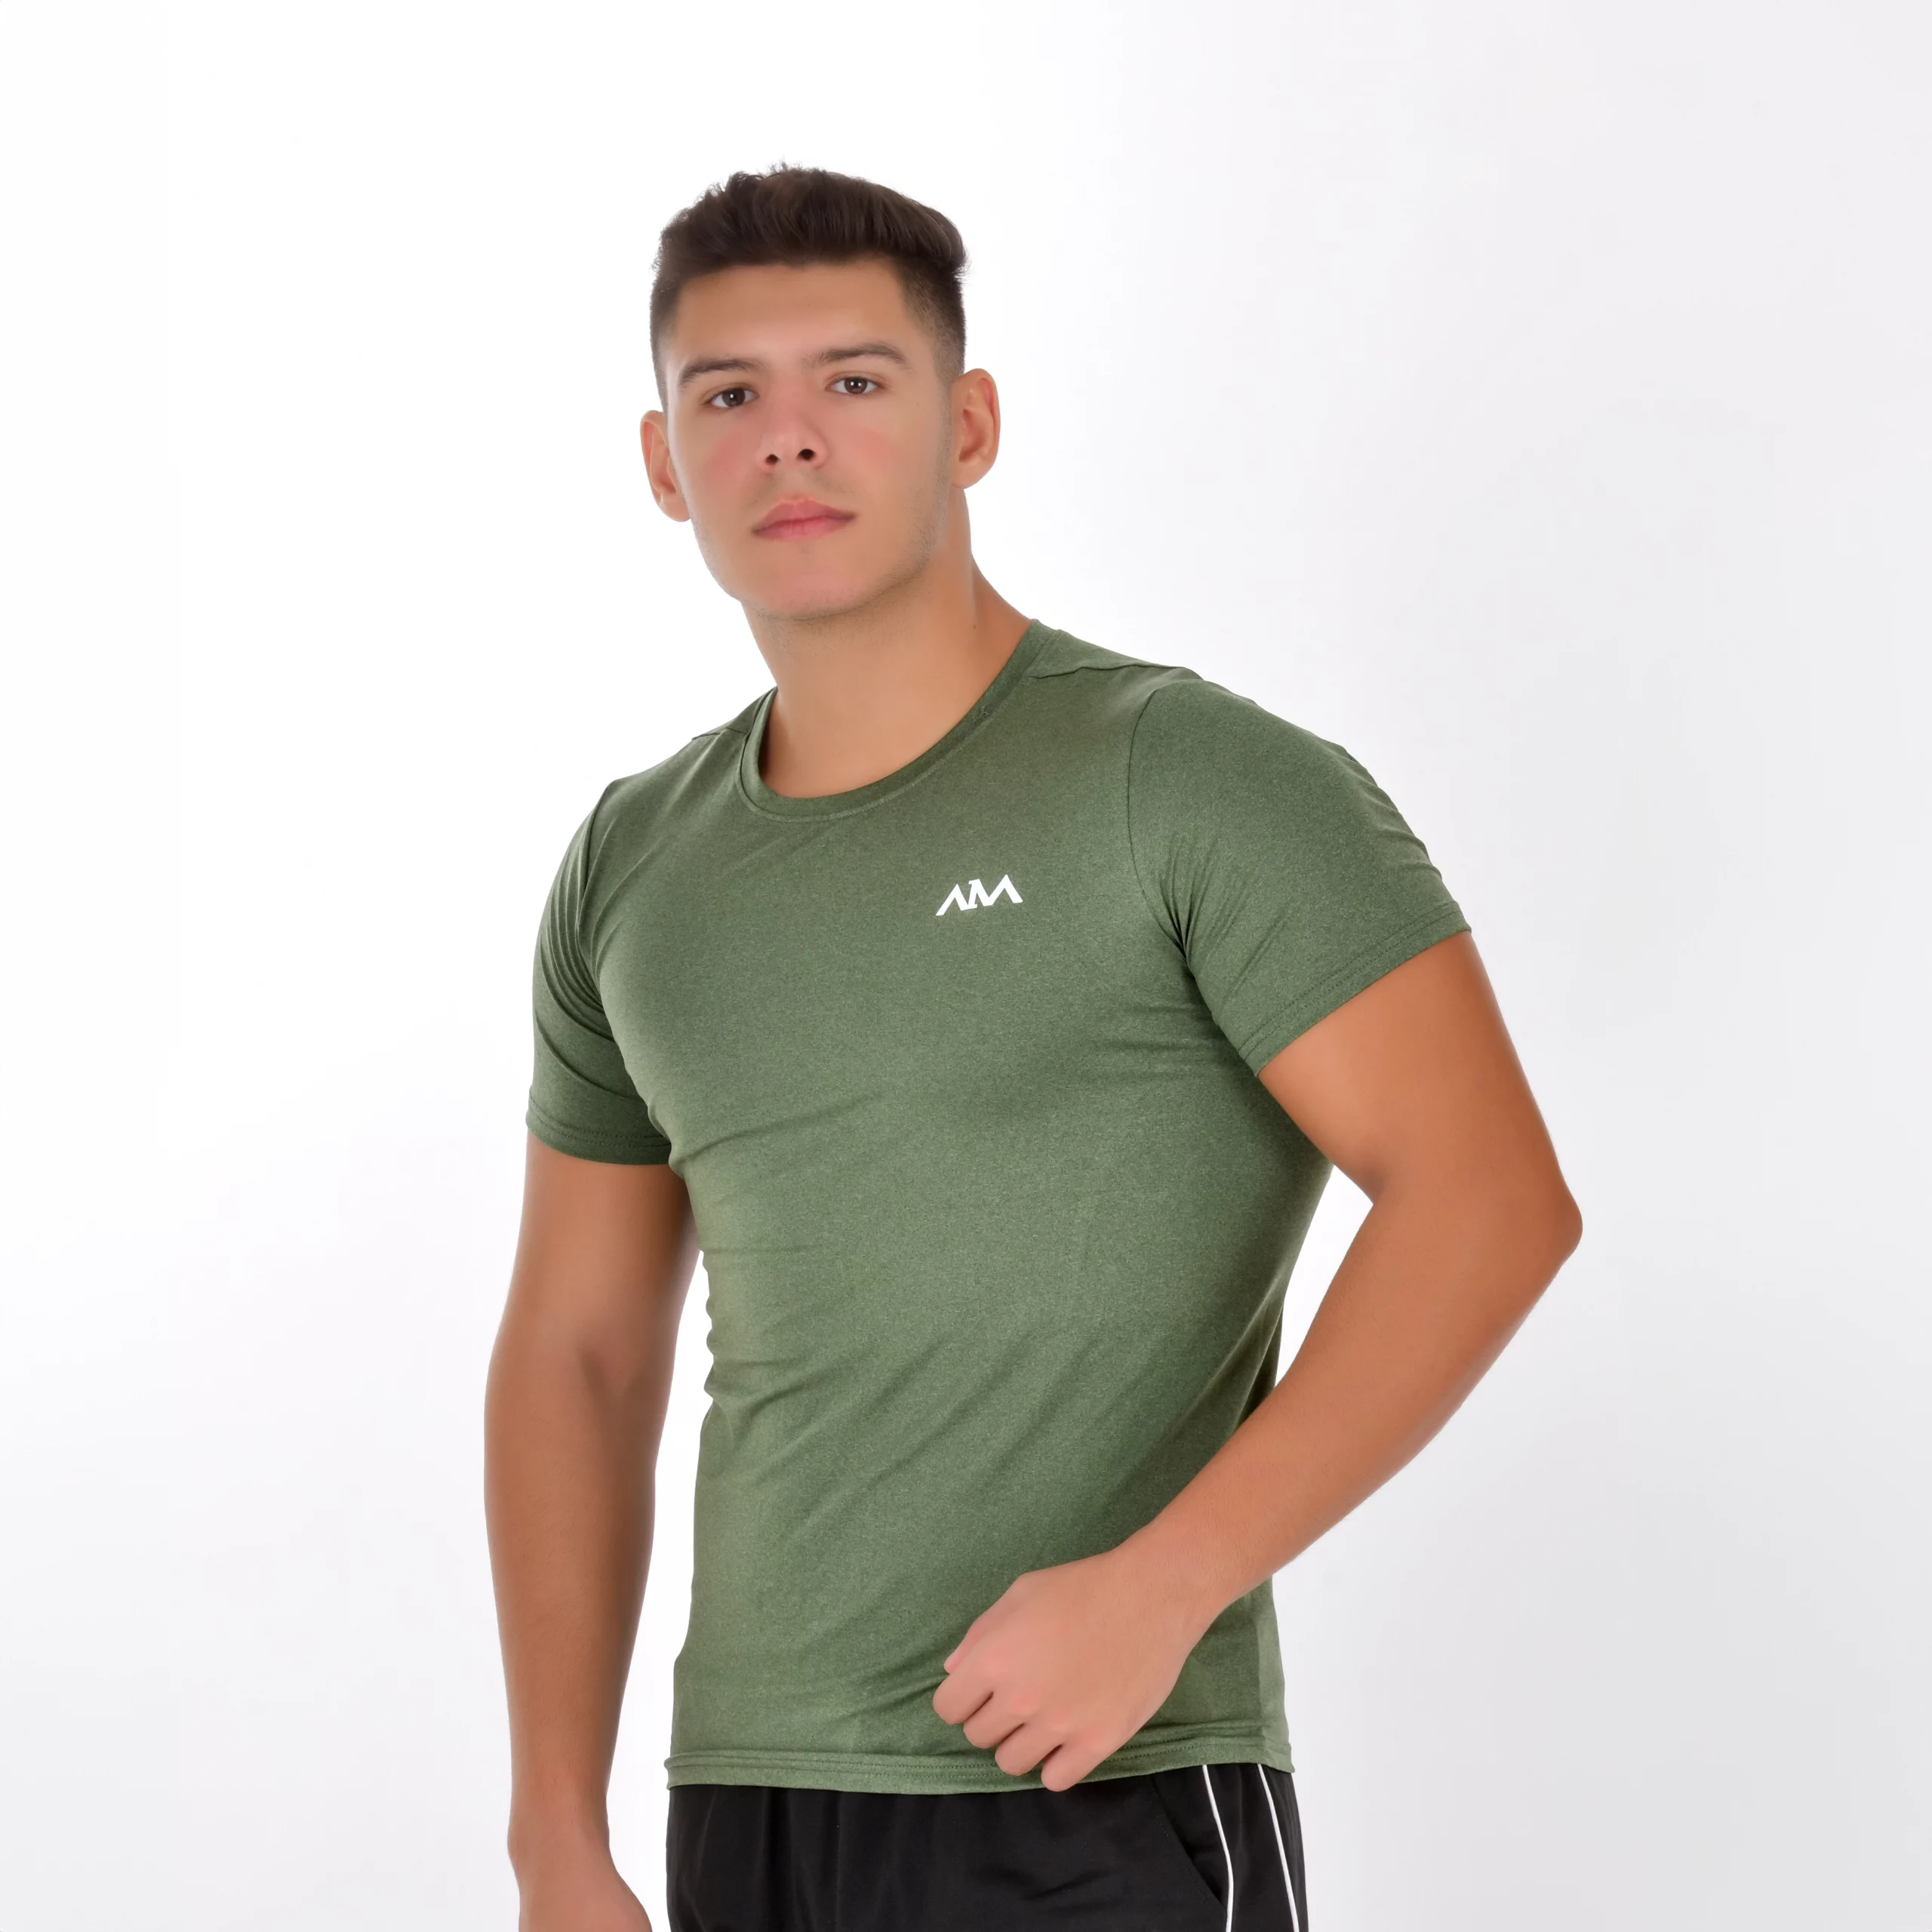 AIM Clothing - High Quality Lebanese Activewear and Sportswear Brand